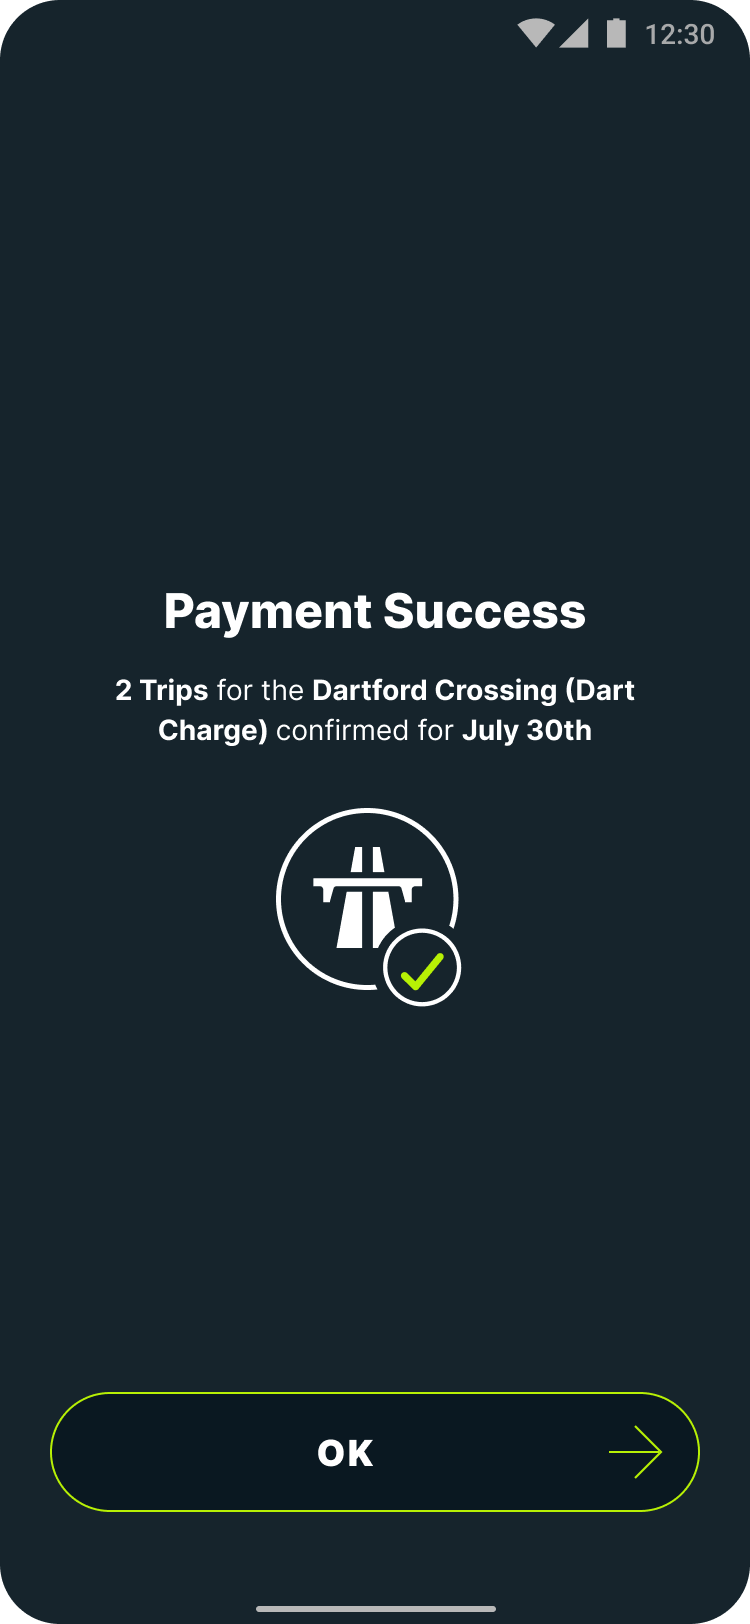 payment confirmation screen for dartford crossing